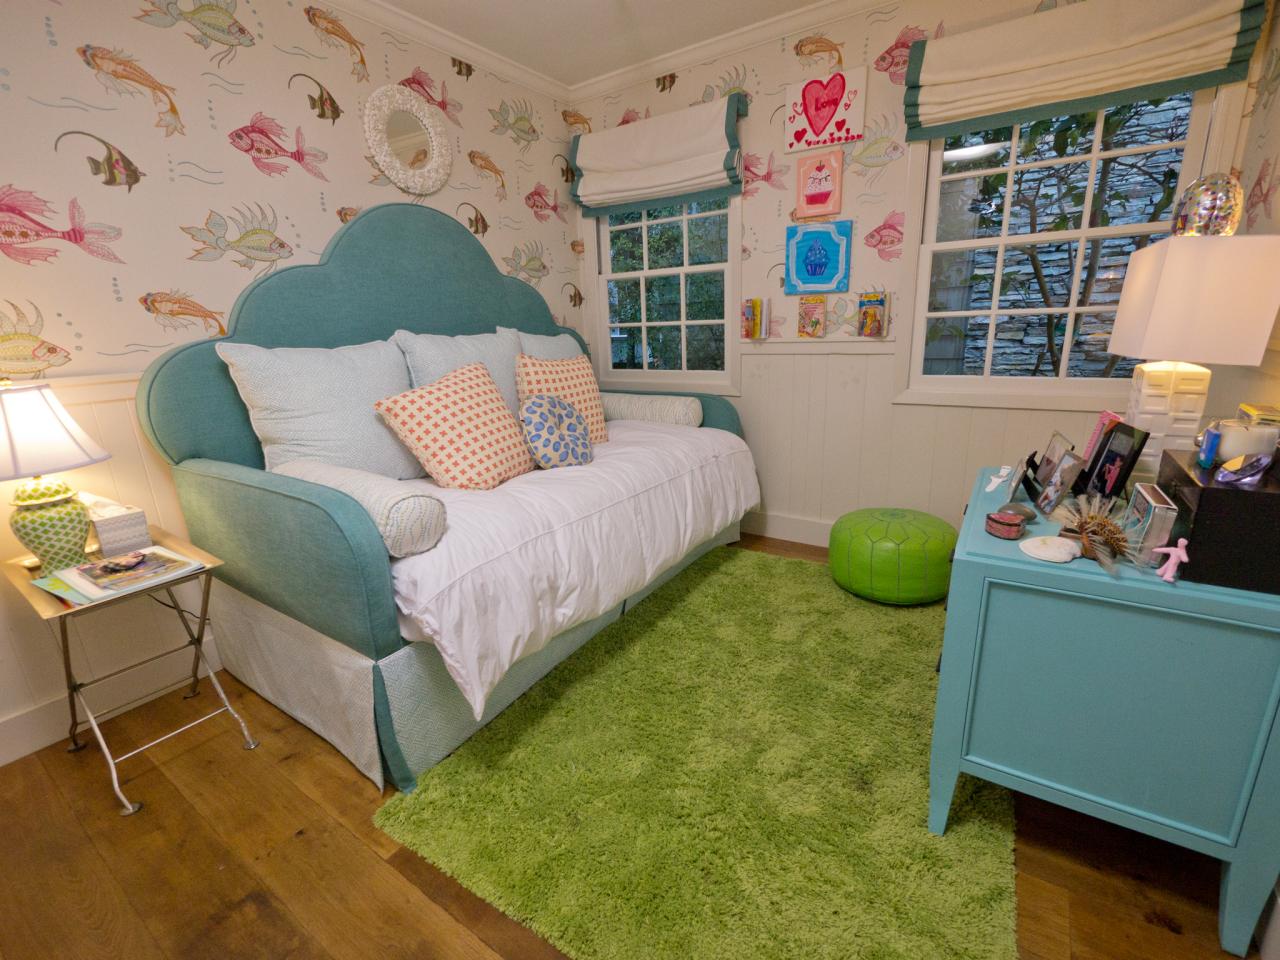 10 Year Old Girl Bedroom Ideas for Small Rooms